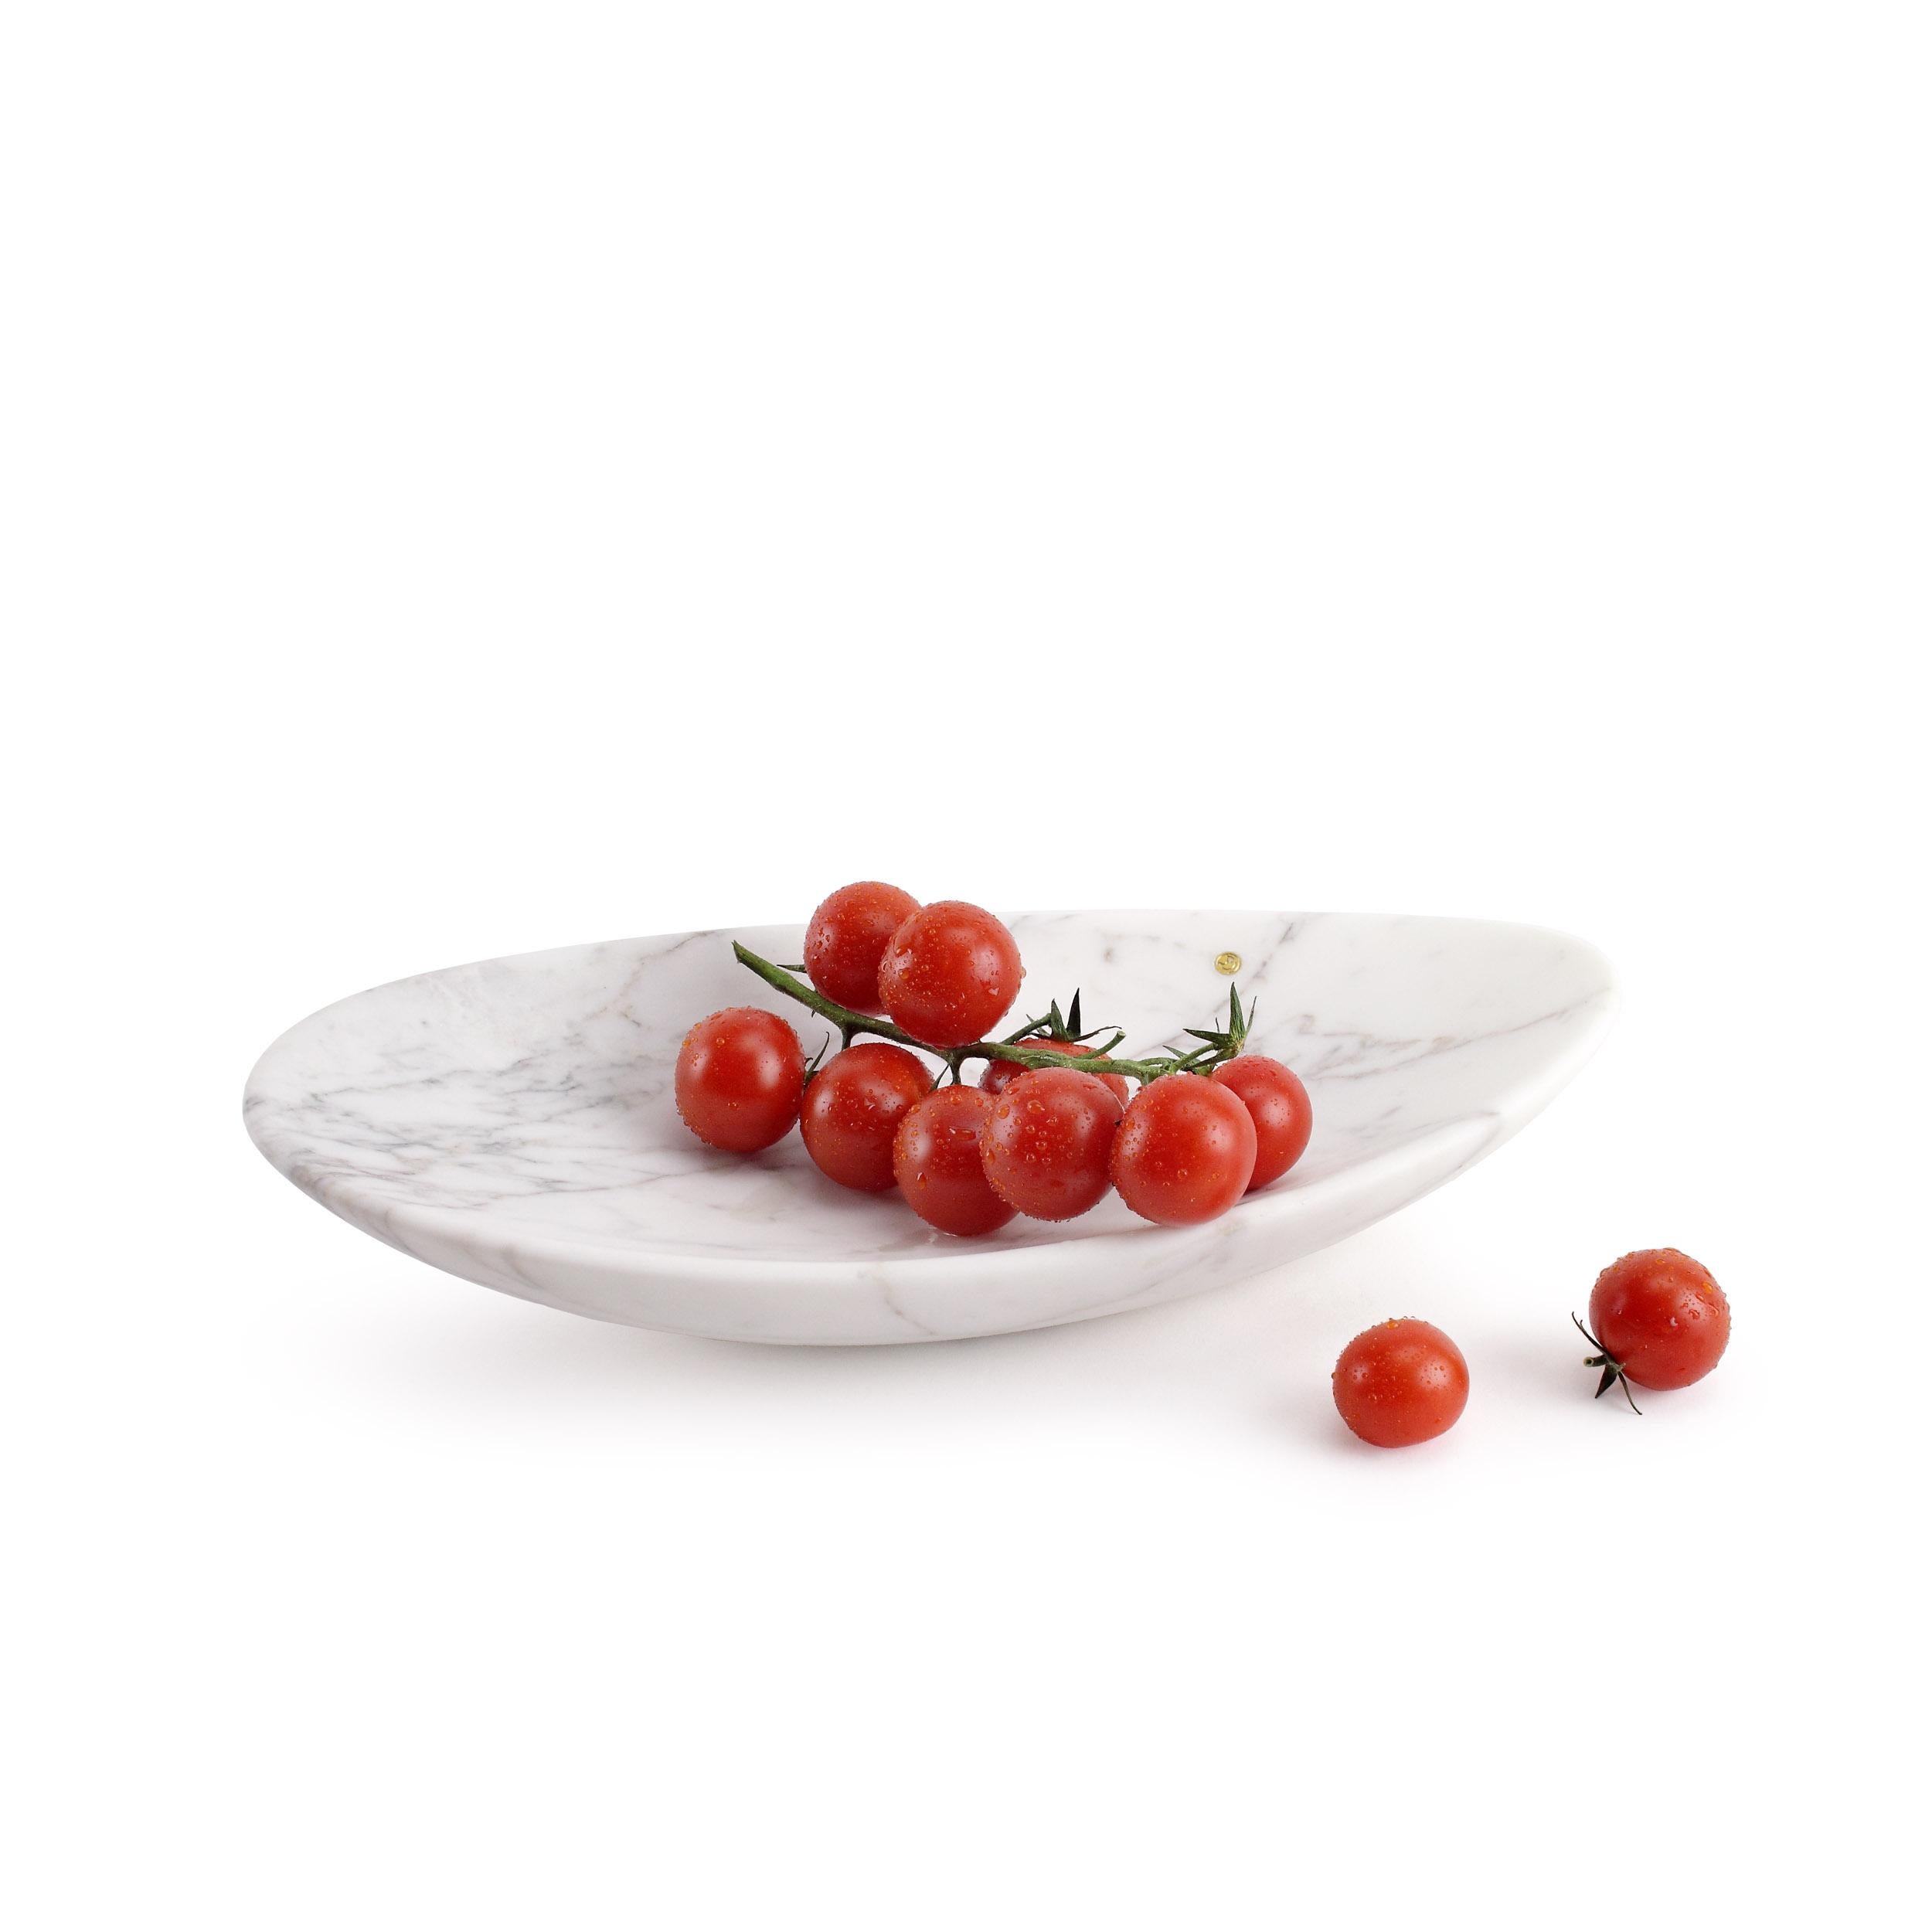 Bowl sculpted by hand from a solid block of Statuario marble. Velvet finishing. 
Dimensions: Small L 35, W 17, H 8 cm. 
Also available: Medium L 45, W 22, H 10 cm and Big L 56, W 27, H 12 cm.
Available in different marbles, onyx and quartzite.